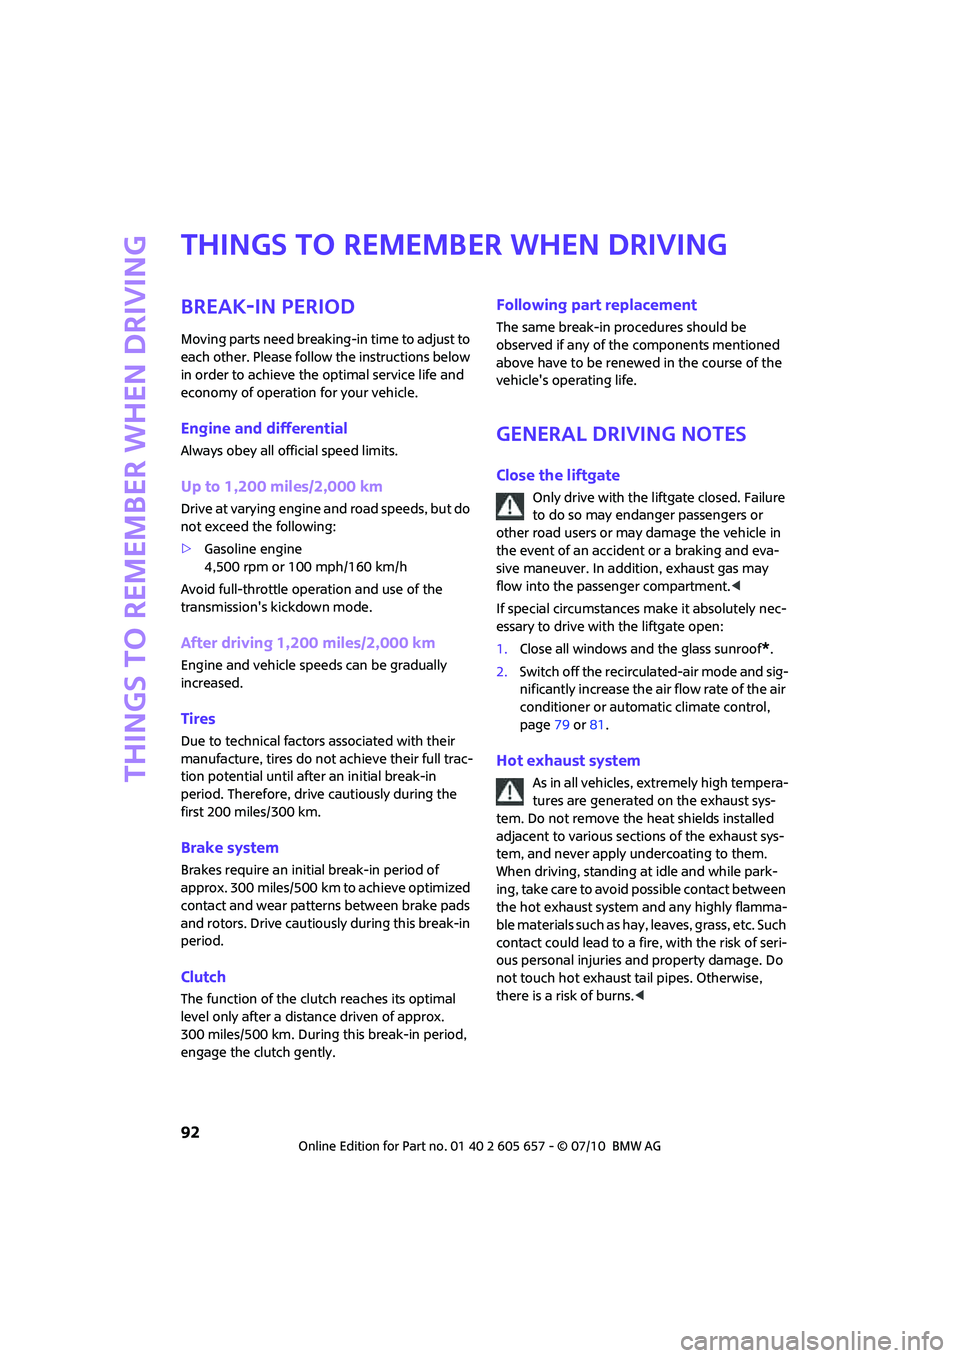 MINI COOPER CONVERTIBLE 2011  Owners Manual Things to remember when driving
92
Things to remember when driving
Break-in period
Moving parts need breaking-in time to adjust to 
each other. Please follow the instructions below 
in order to achiev